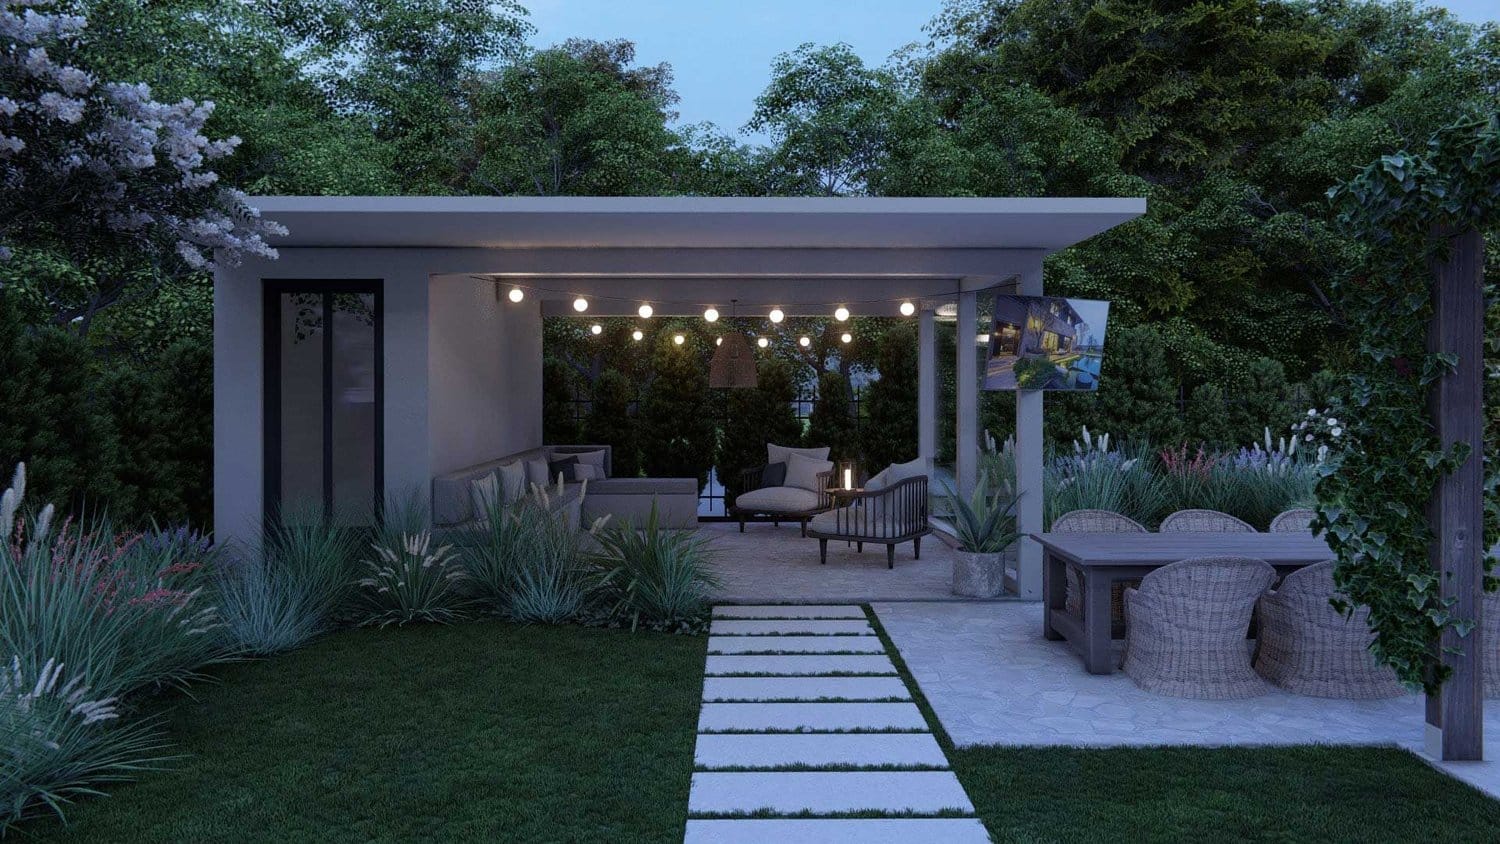 Ocean City backyard garden with dining area and patio with pergola over lounge set